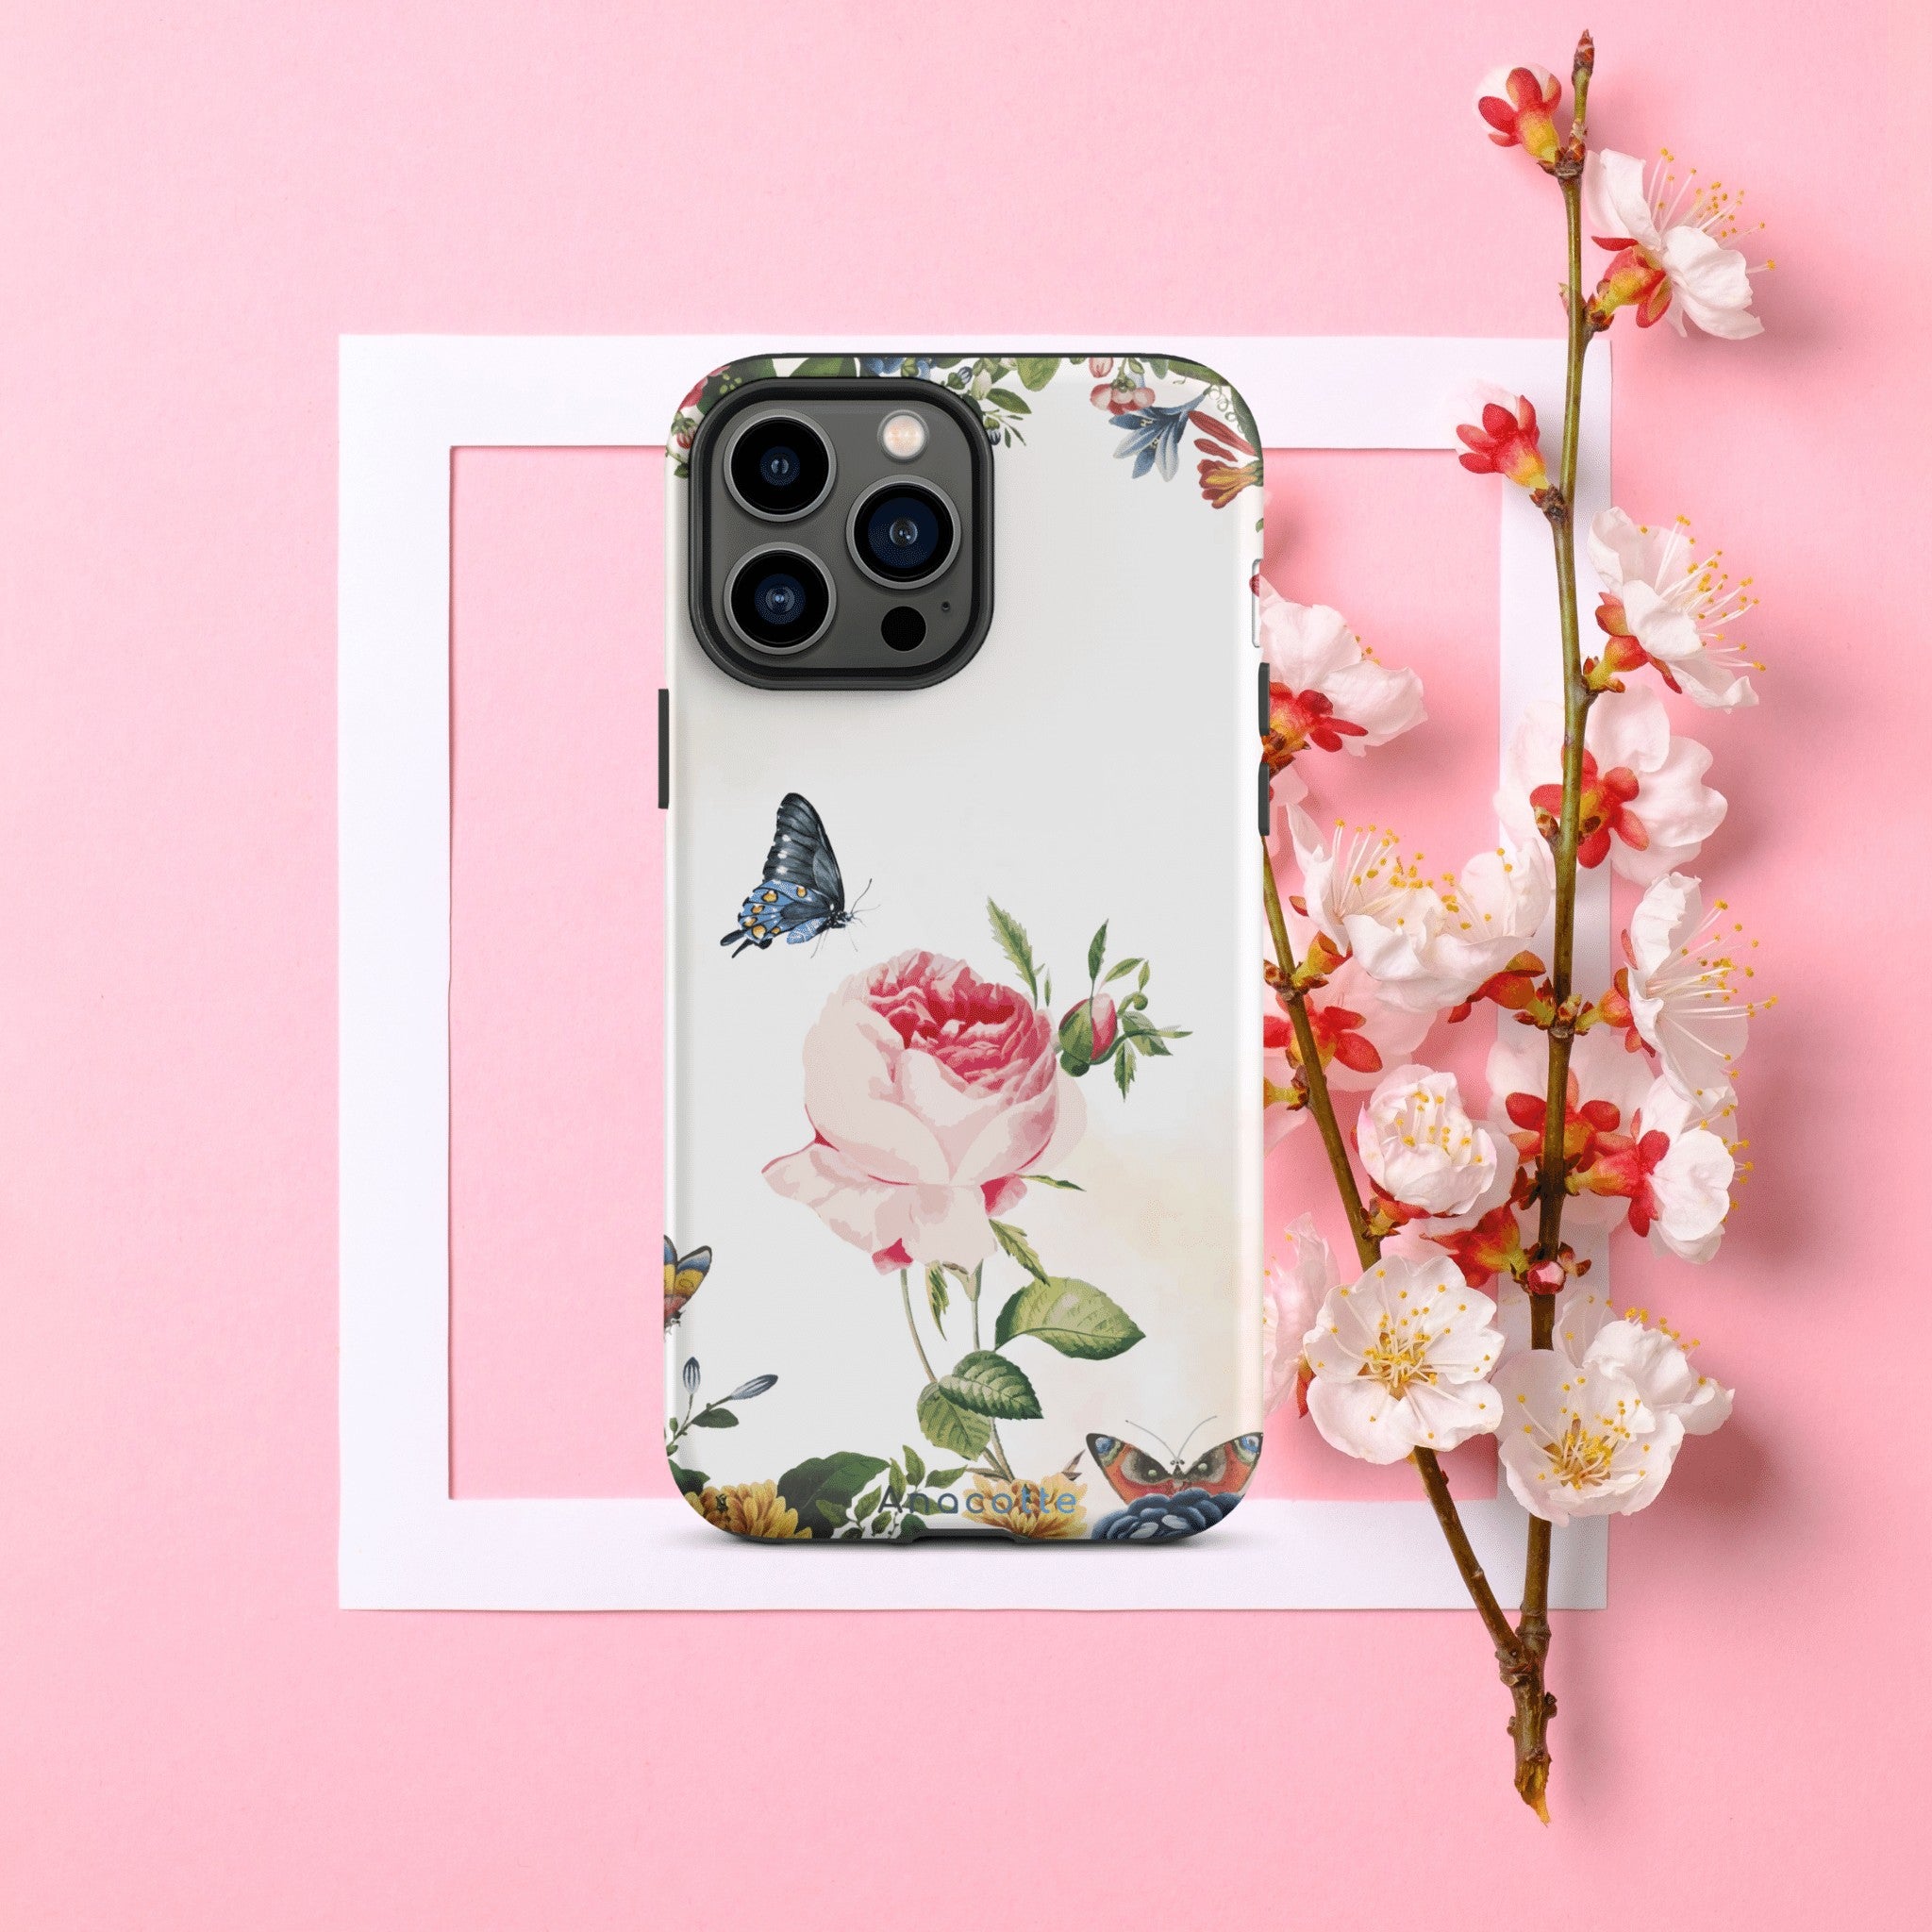 Anacotte Stunning Flower and Butterfly iPhone case Anacotte